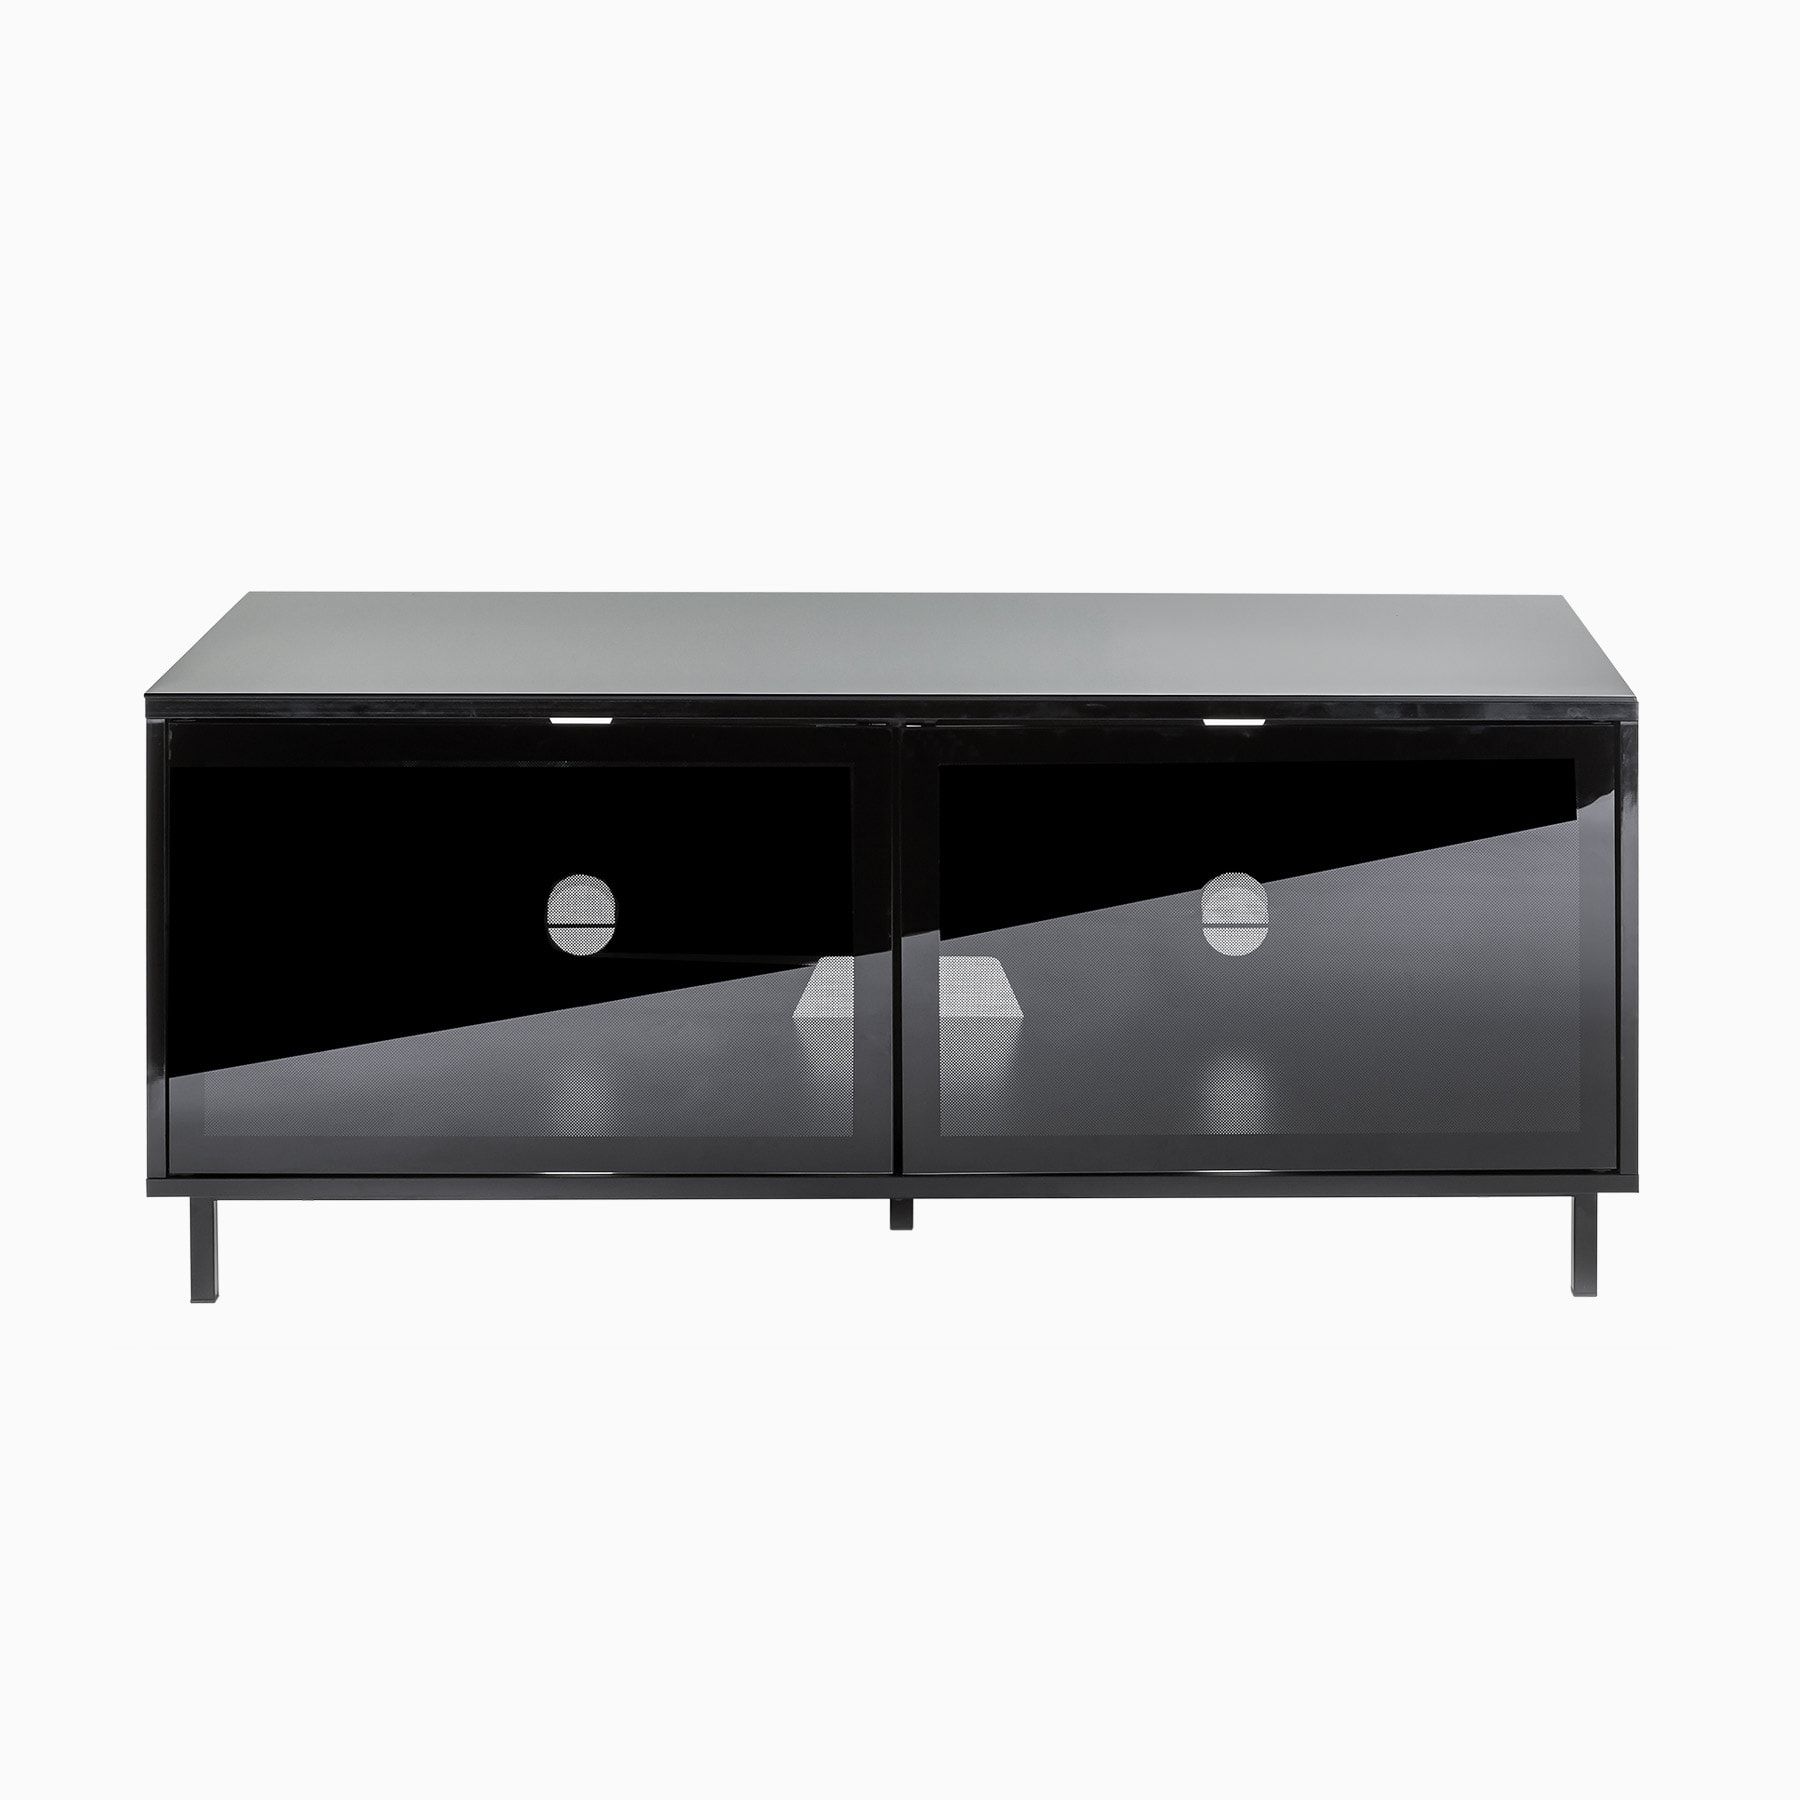 Black Gloss Tv Unit Up To 55 Inch Flat Tv | Ddsetvc 1200blk Inside Black Gloss Tv Stands (View 8 of 15)